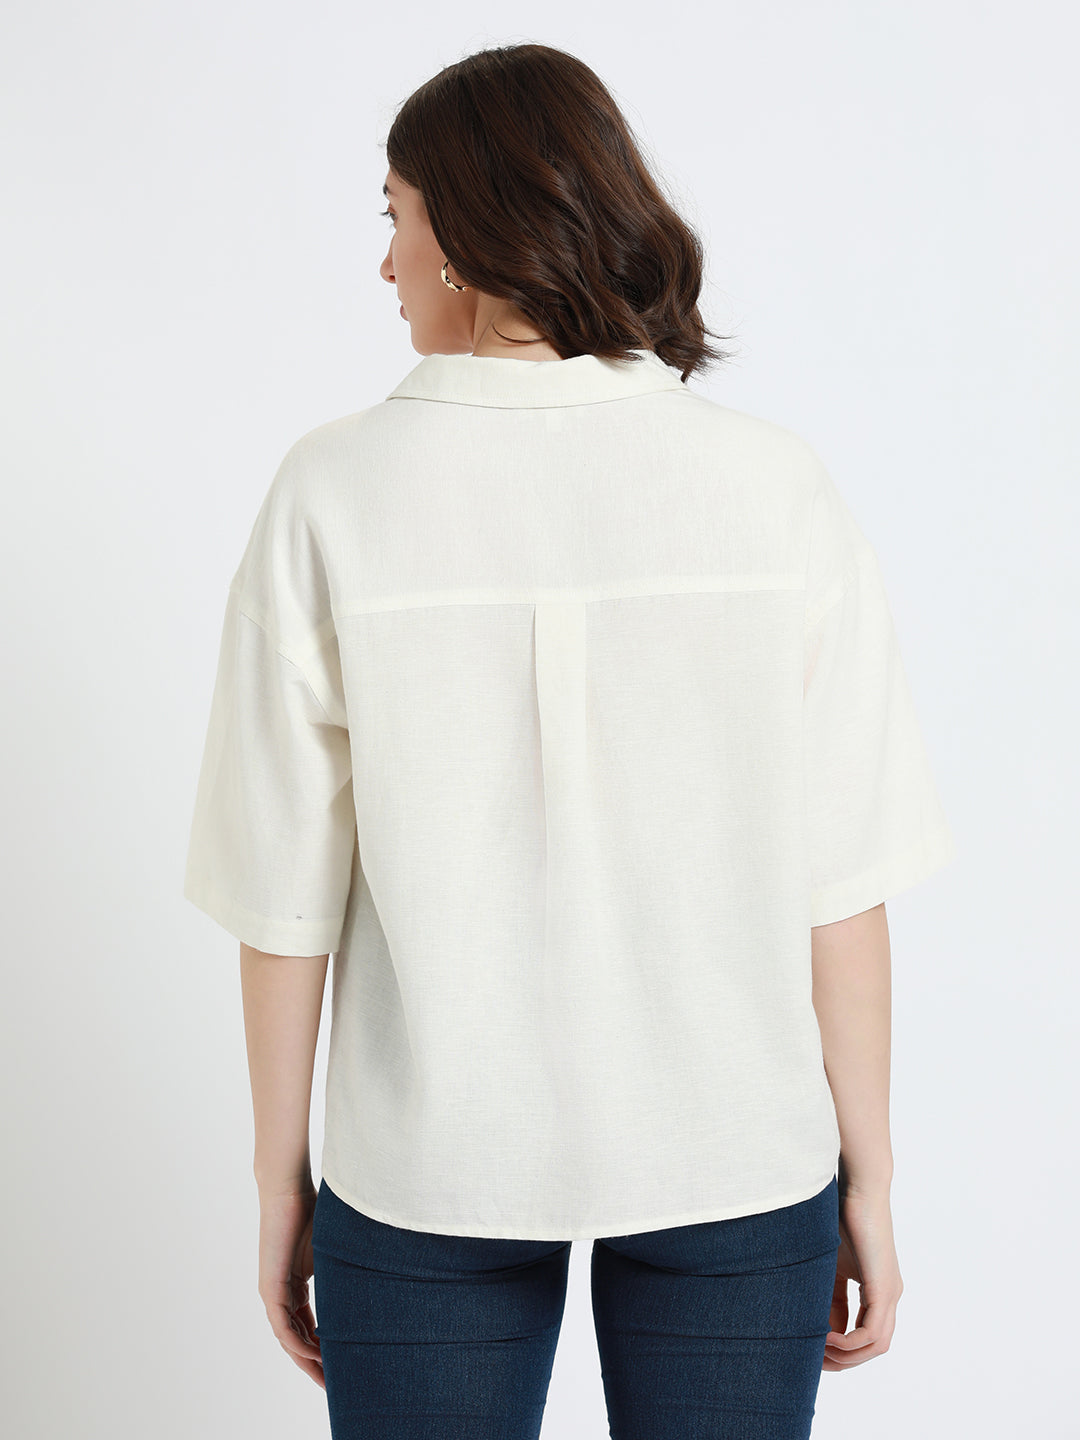 DL Woman Shirt Collar Relaxed Fit Off White Shirt